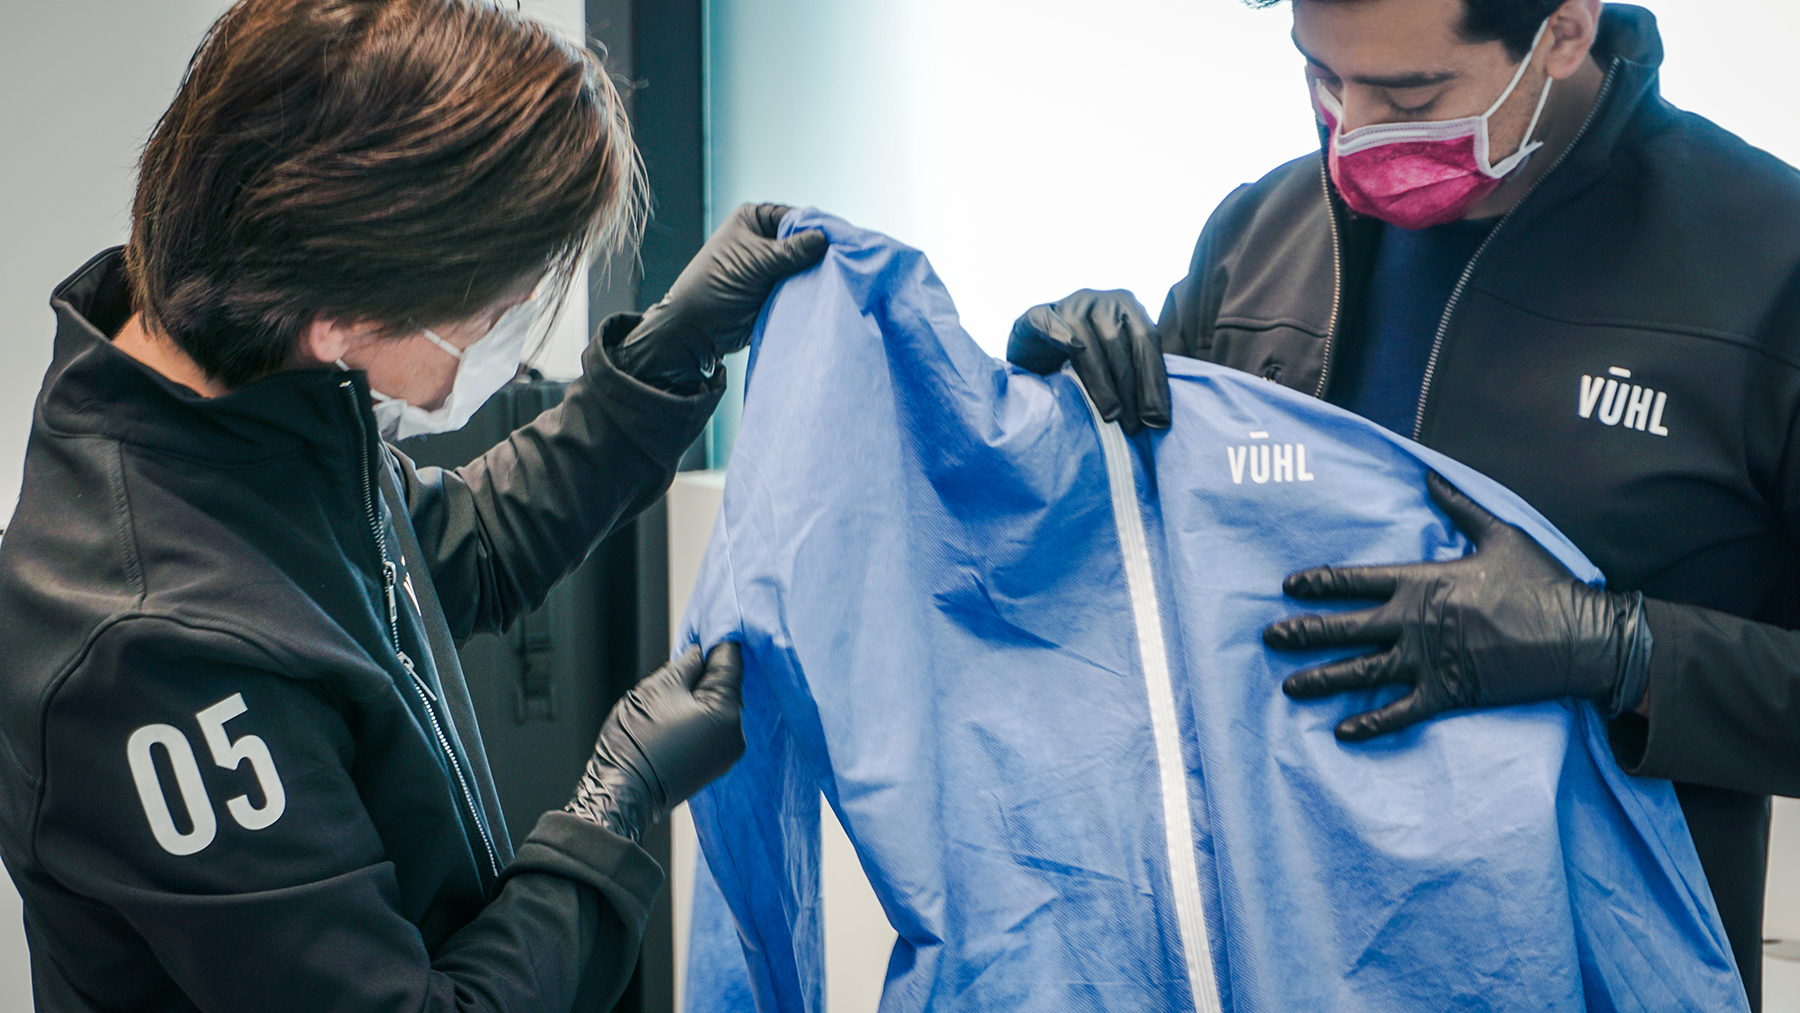 VUHL Automotive starts production of protection equipment for medical personnel in Queretaro